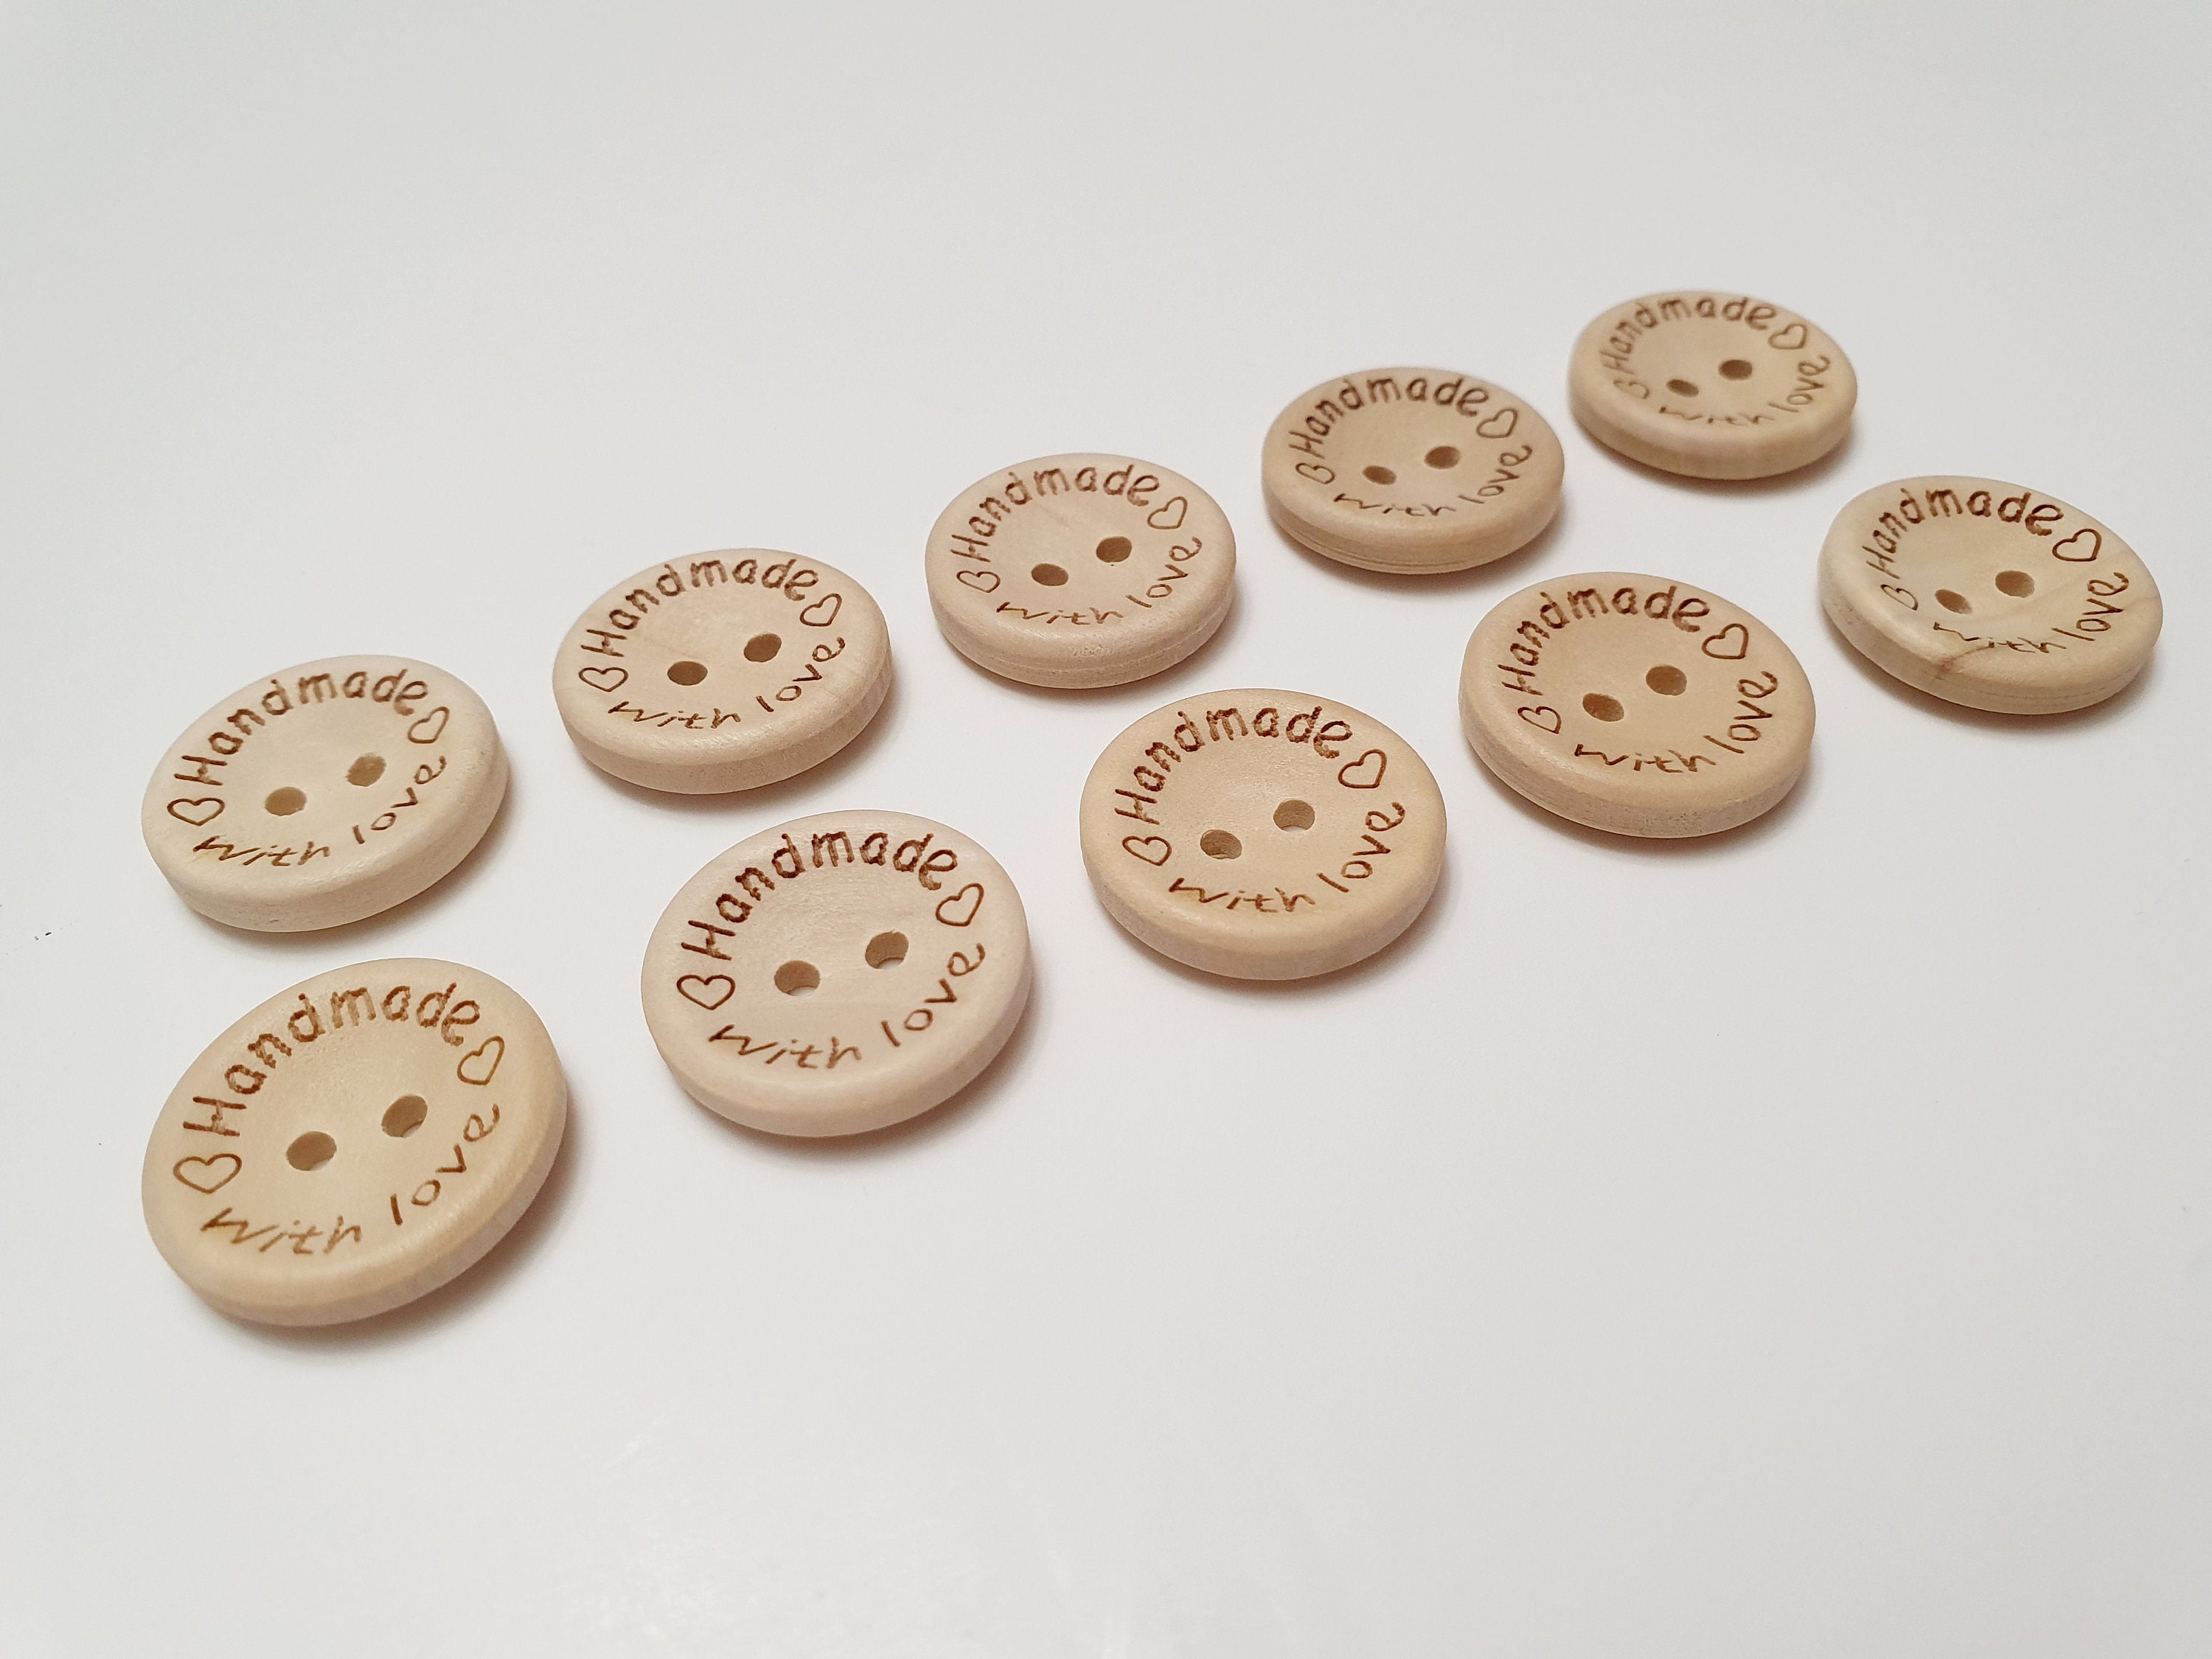 DIY CRAFT WOOD"HANDMADE WITH LOVE BUTTONS" 2 SIZES 10